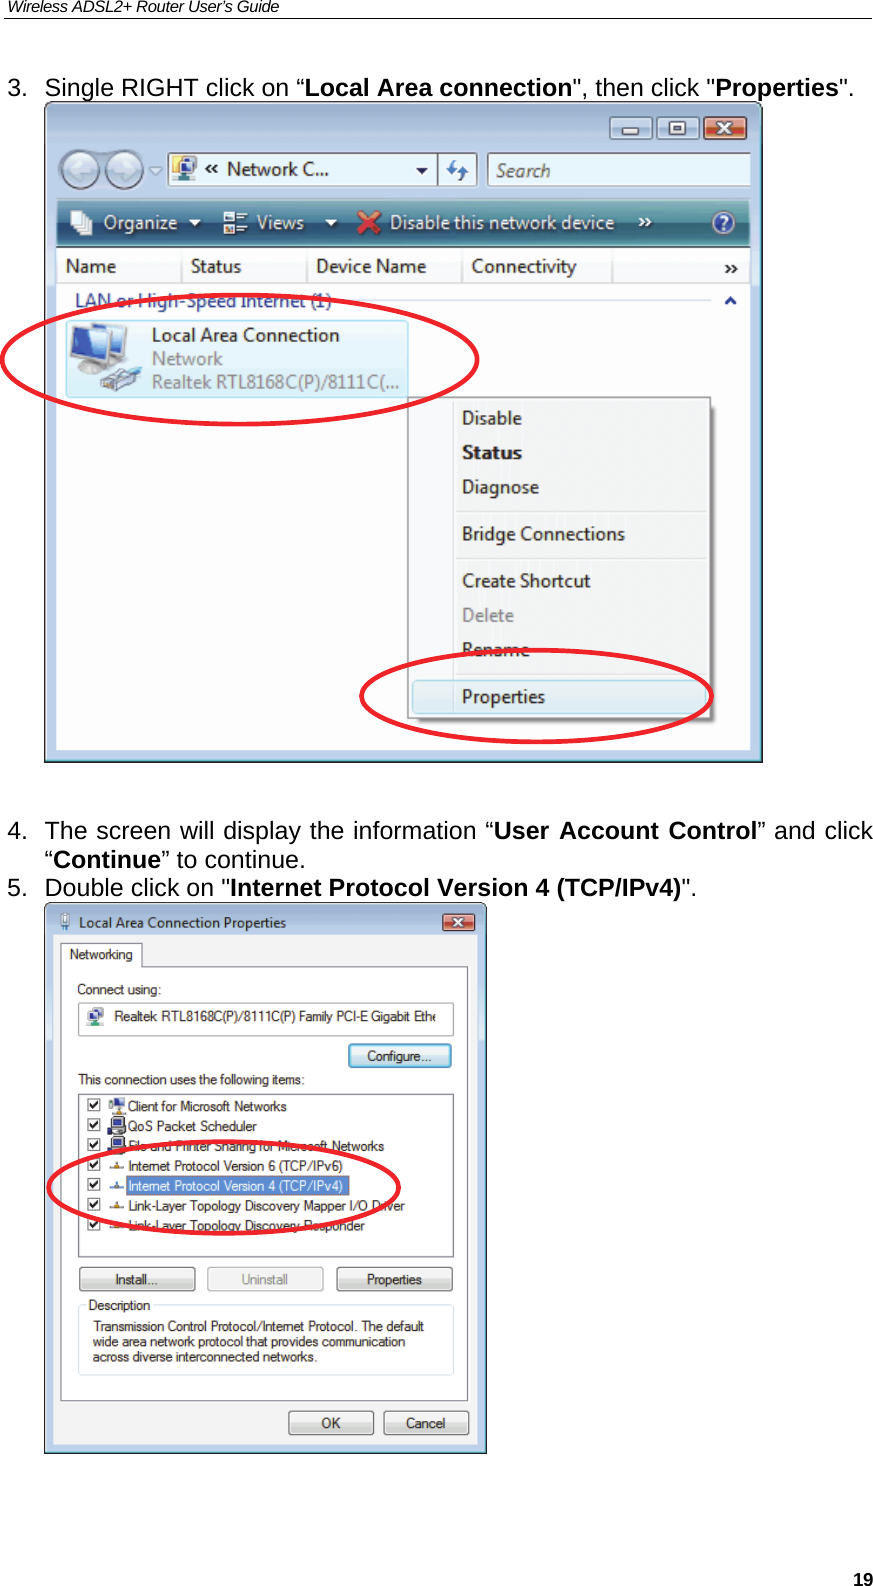 Wireless ADSL2+ Router User’s Guide     193.  Single RIGHT click on “Local Area connection&quot;, then click &quot;Properties&quot;.   4.  The screen will display the information “User Account Control” and click    “Continue” to continue. 5.  Double click on &quot;Internet Protocol Version 4 (TCP/IPv4)&quot;.   